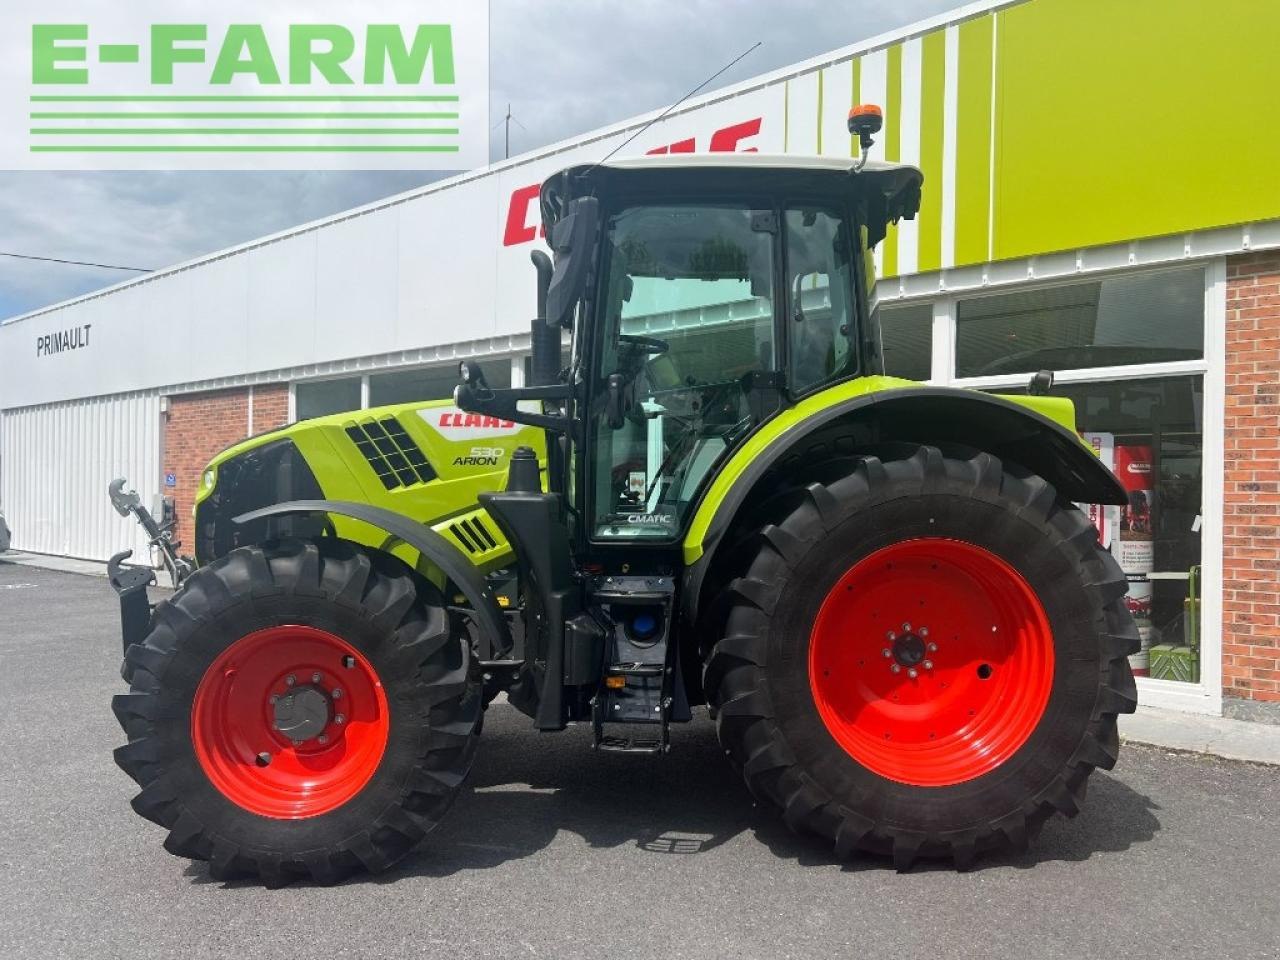 Farm tractor CLAAS arion 530 c-matic stage v